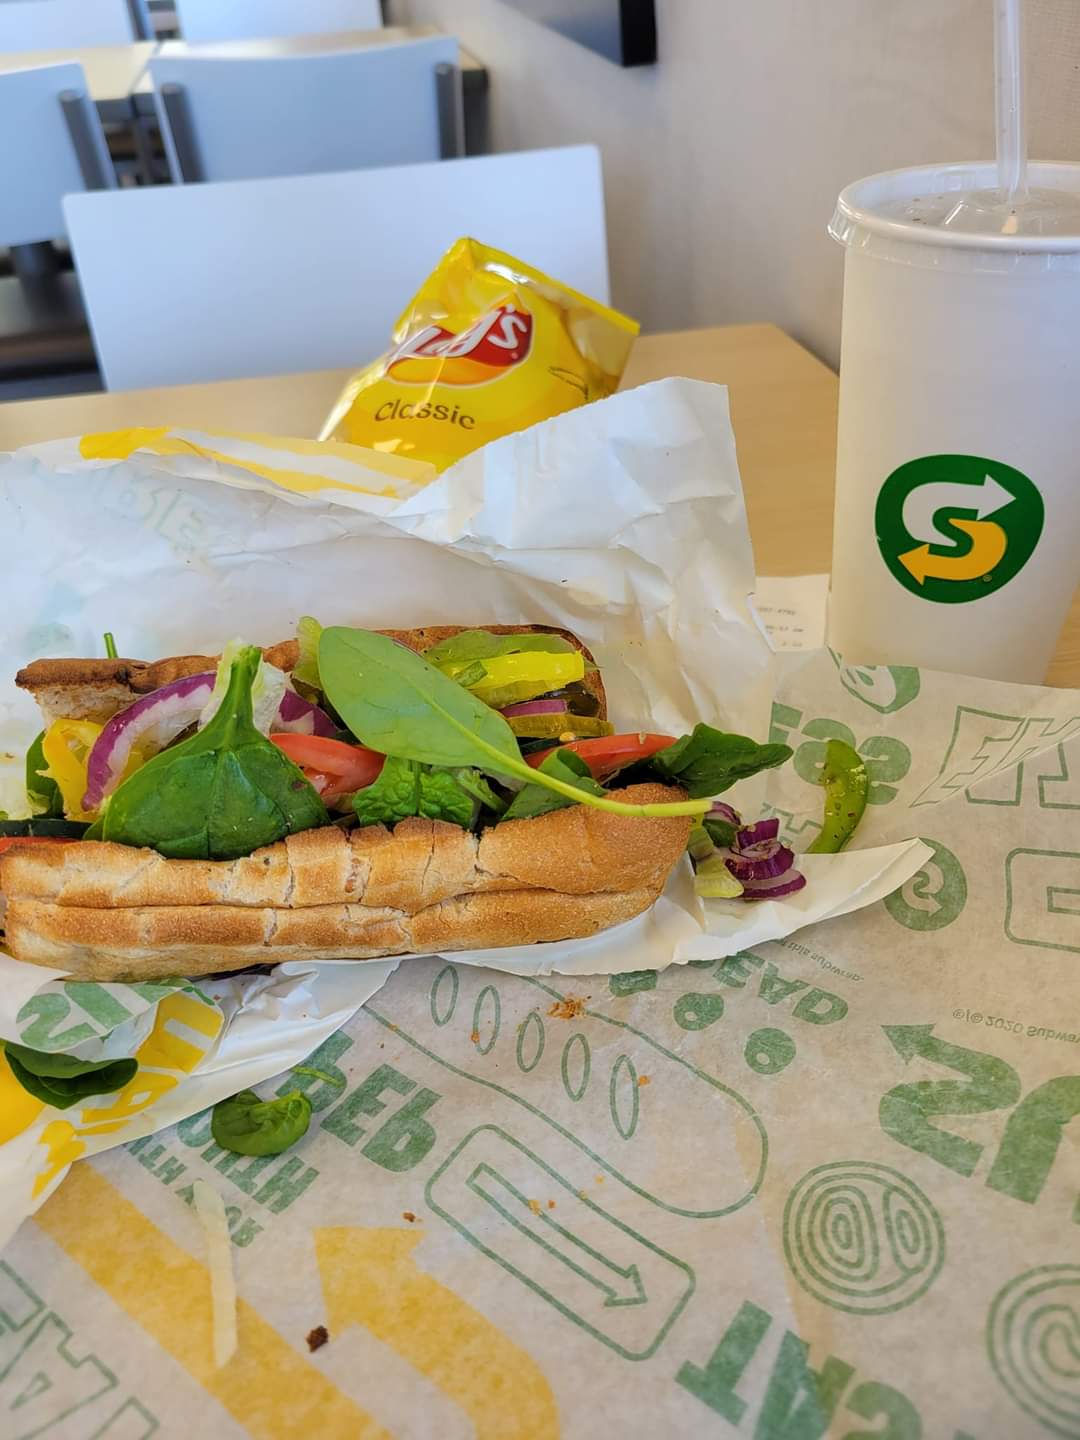 Vegan sandwich from Subway on table